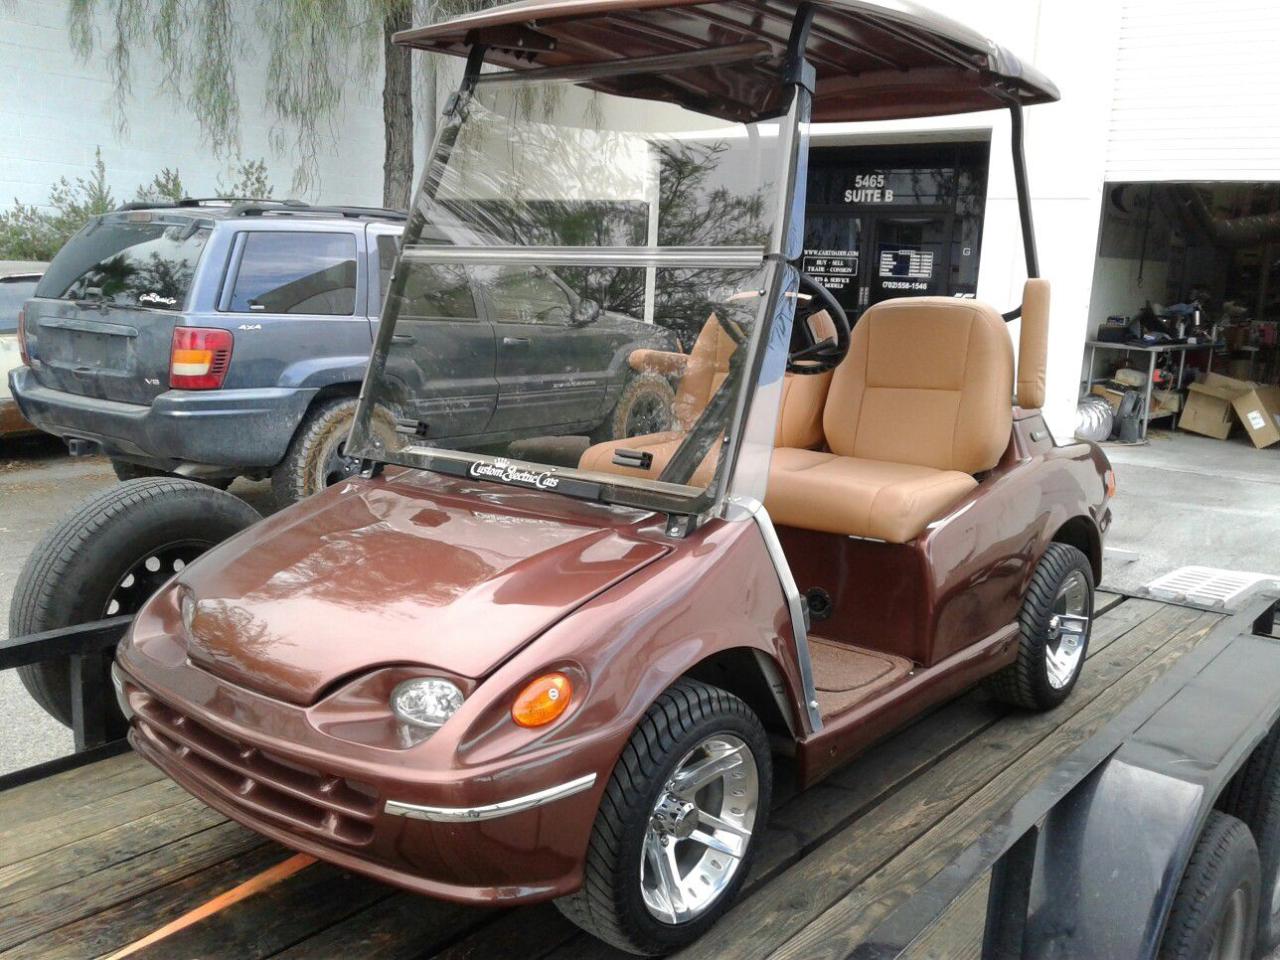 Used Golf Carts for Sale by Owner in Ritchie, West Virginia: Find Your Perfect Ride Today!